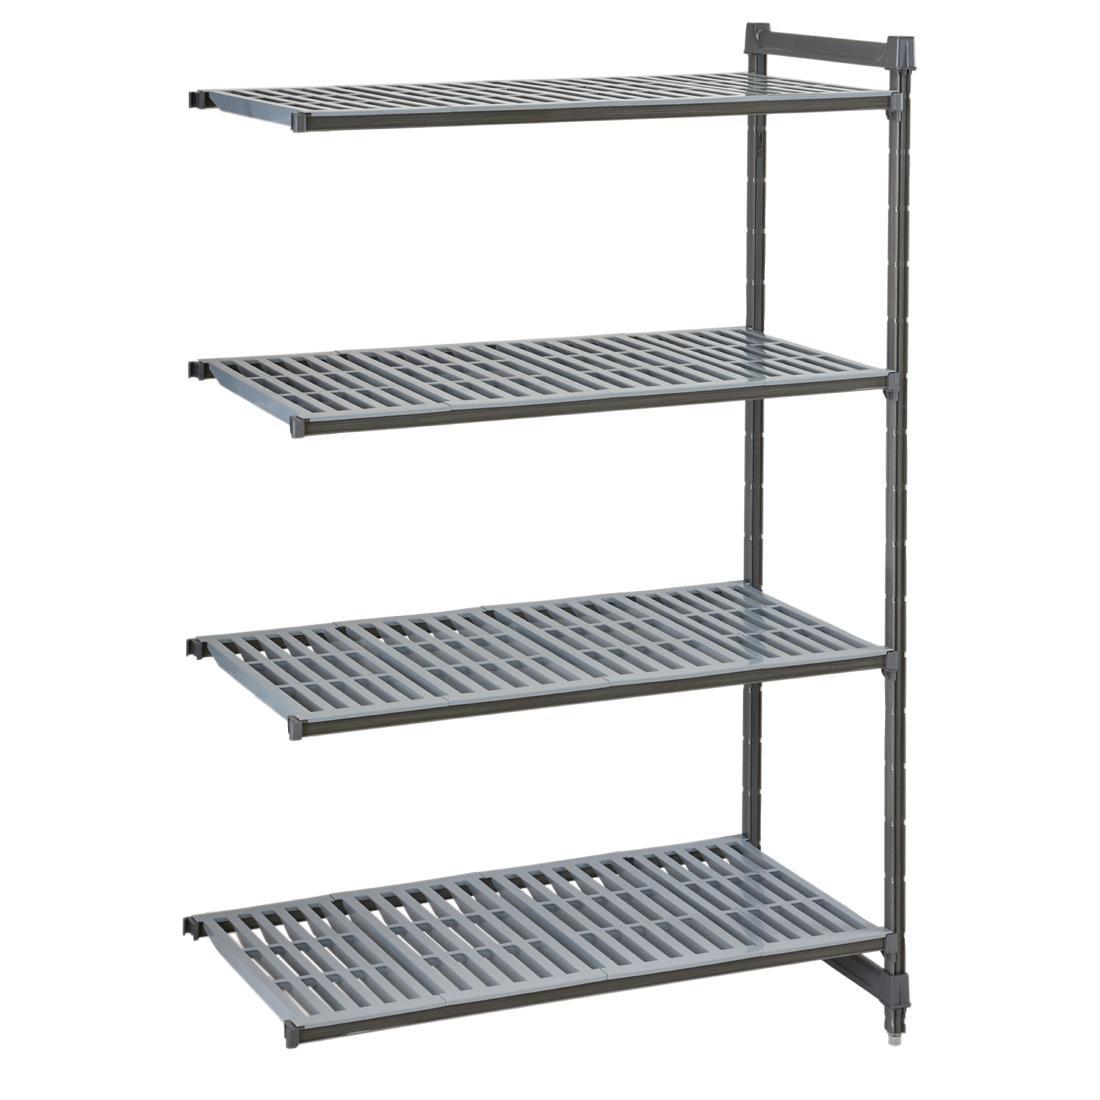 Cambro Camshelving Basics Plus Add-On Unit 4 Tier With Vented Shelves 1830H x 1480W x 460D mm